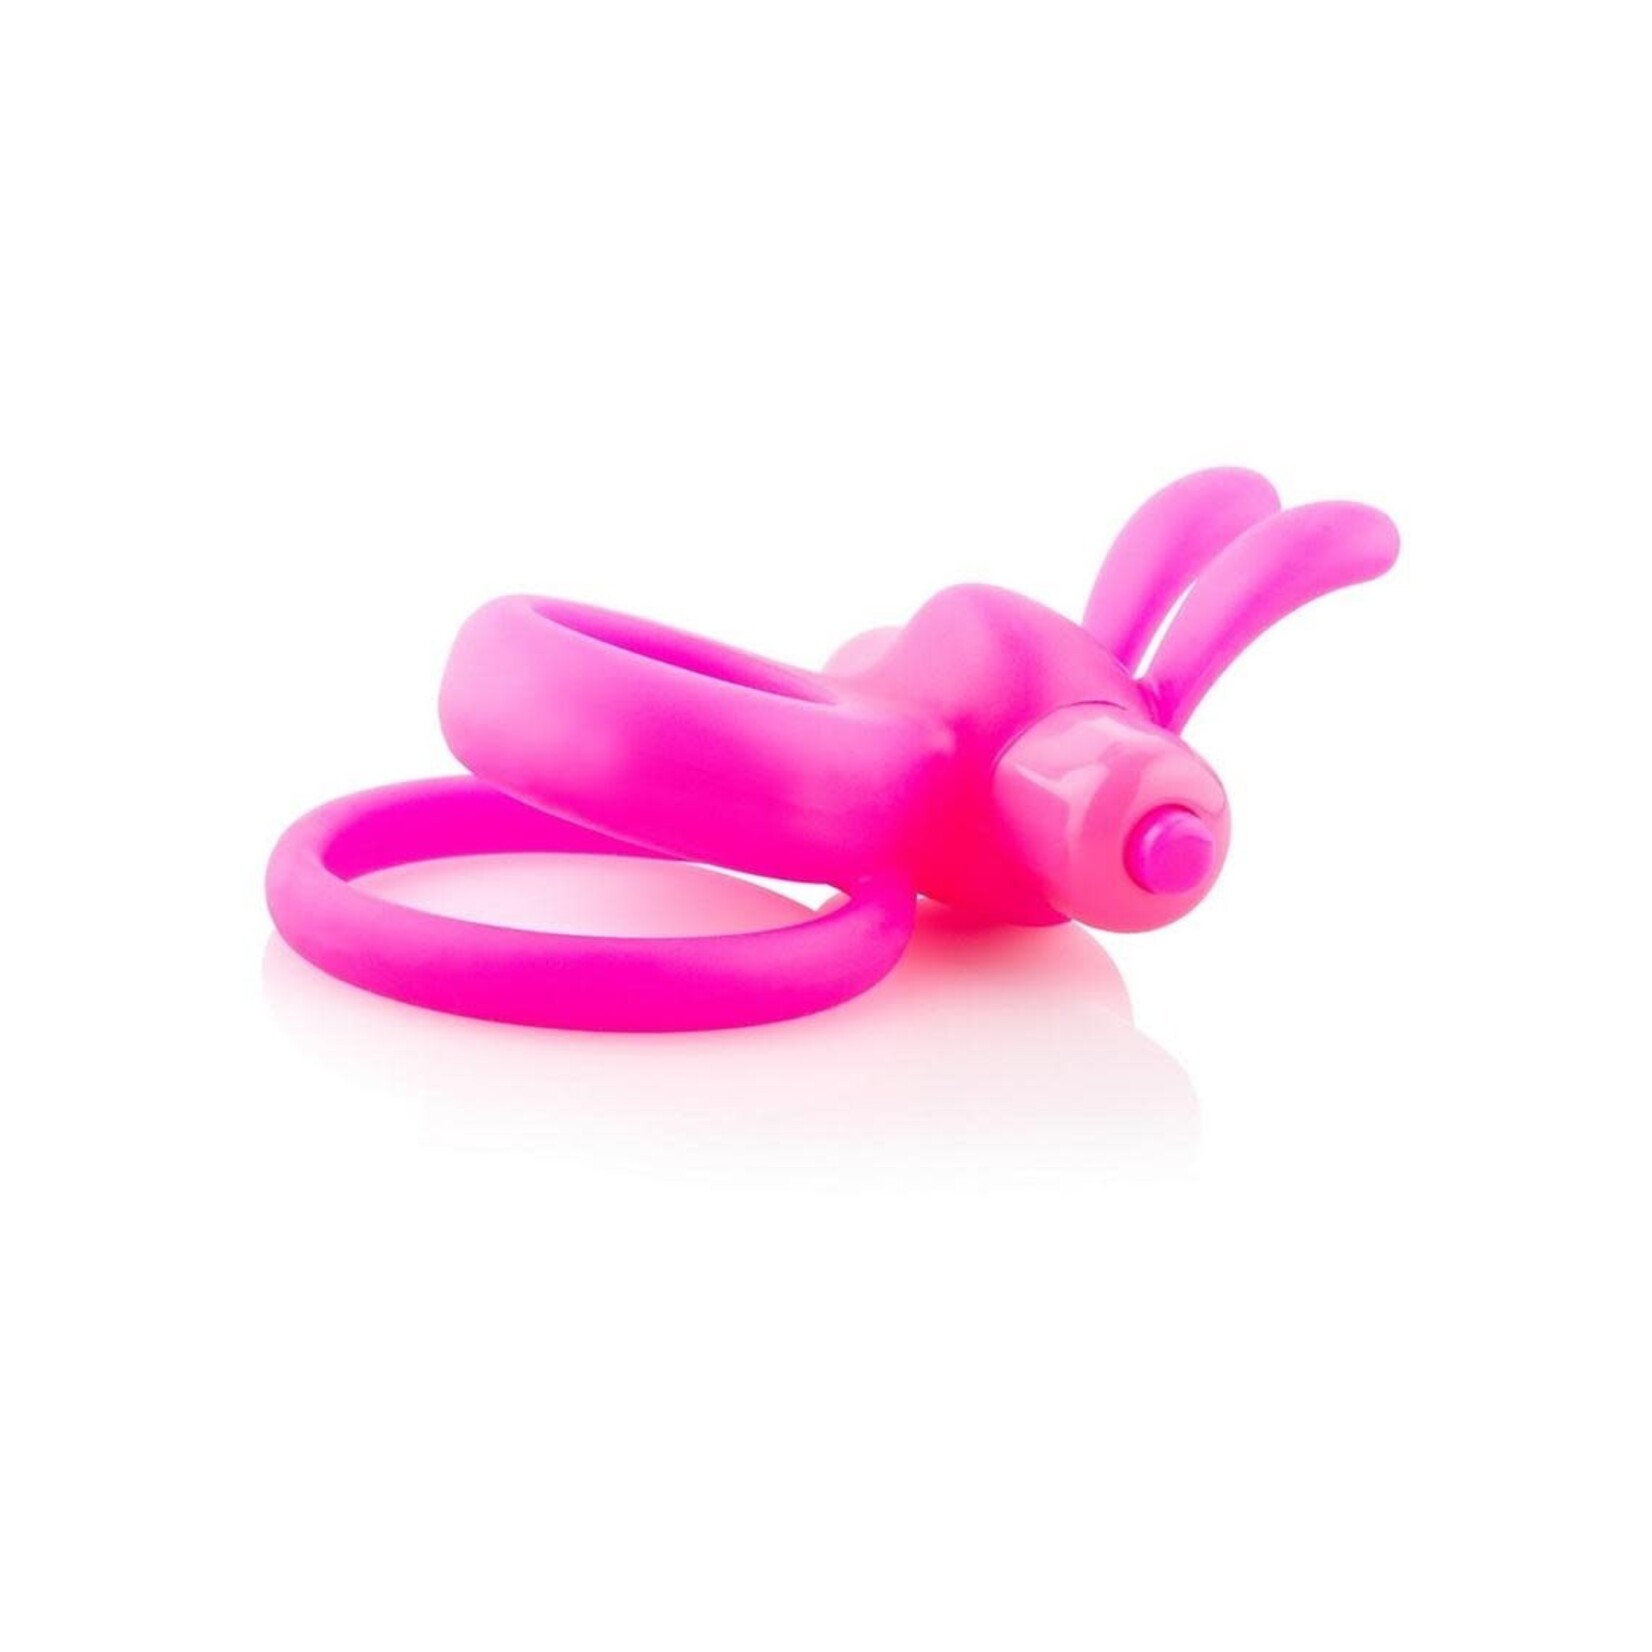 Ohare Silicone Vibrating Rabbit Cockring Waterproof Pink